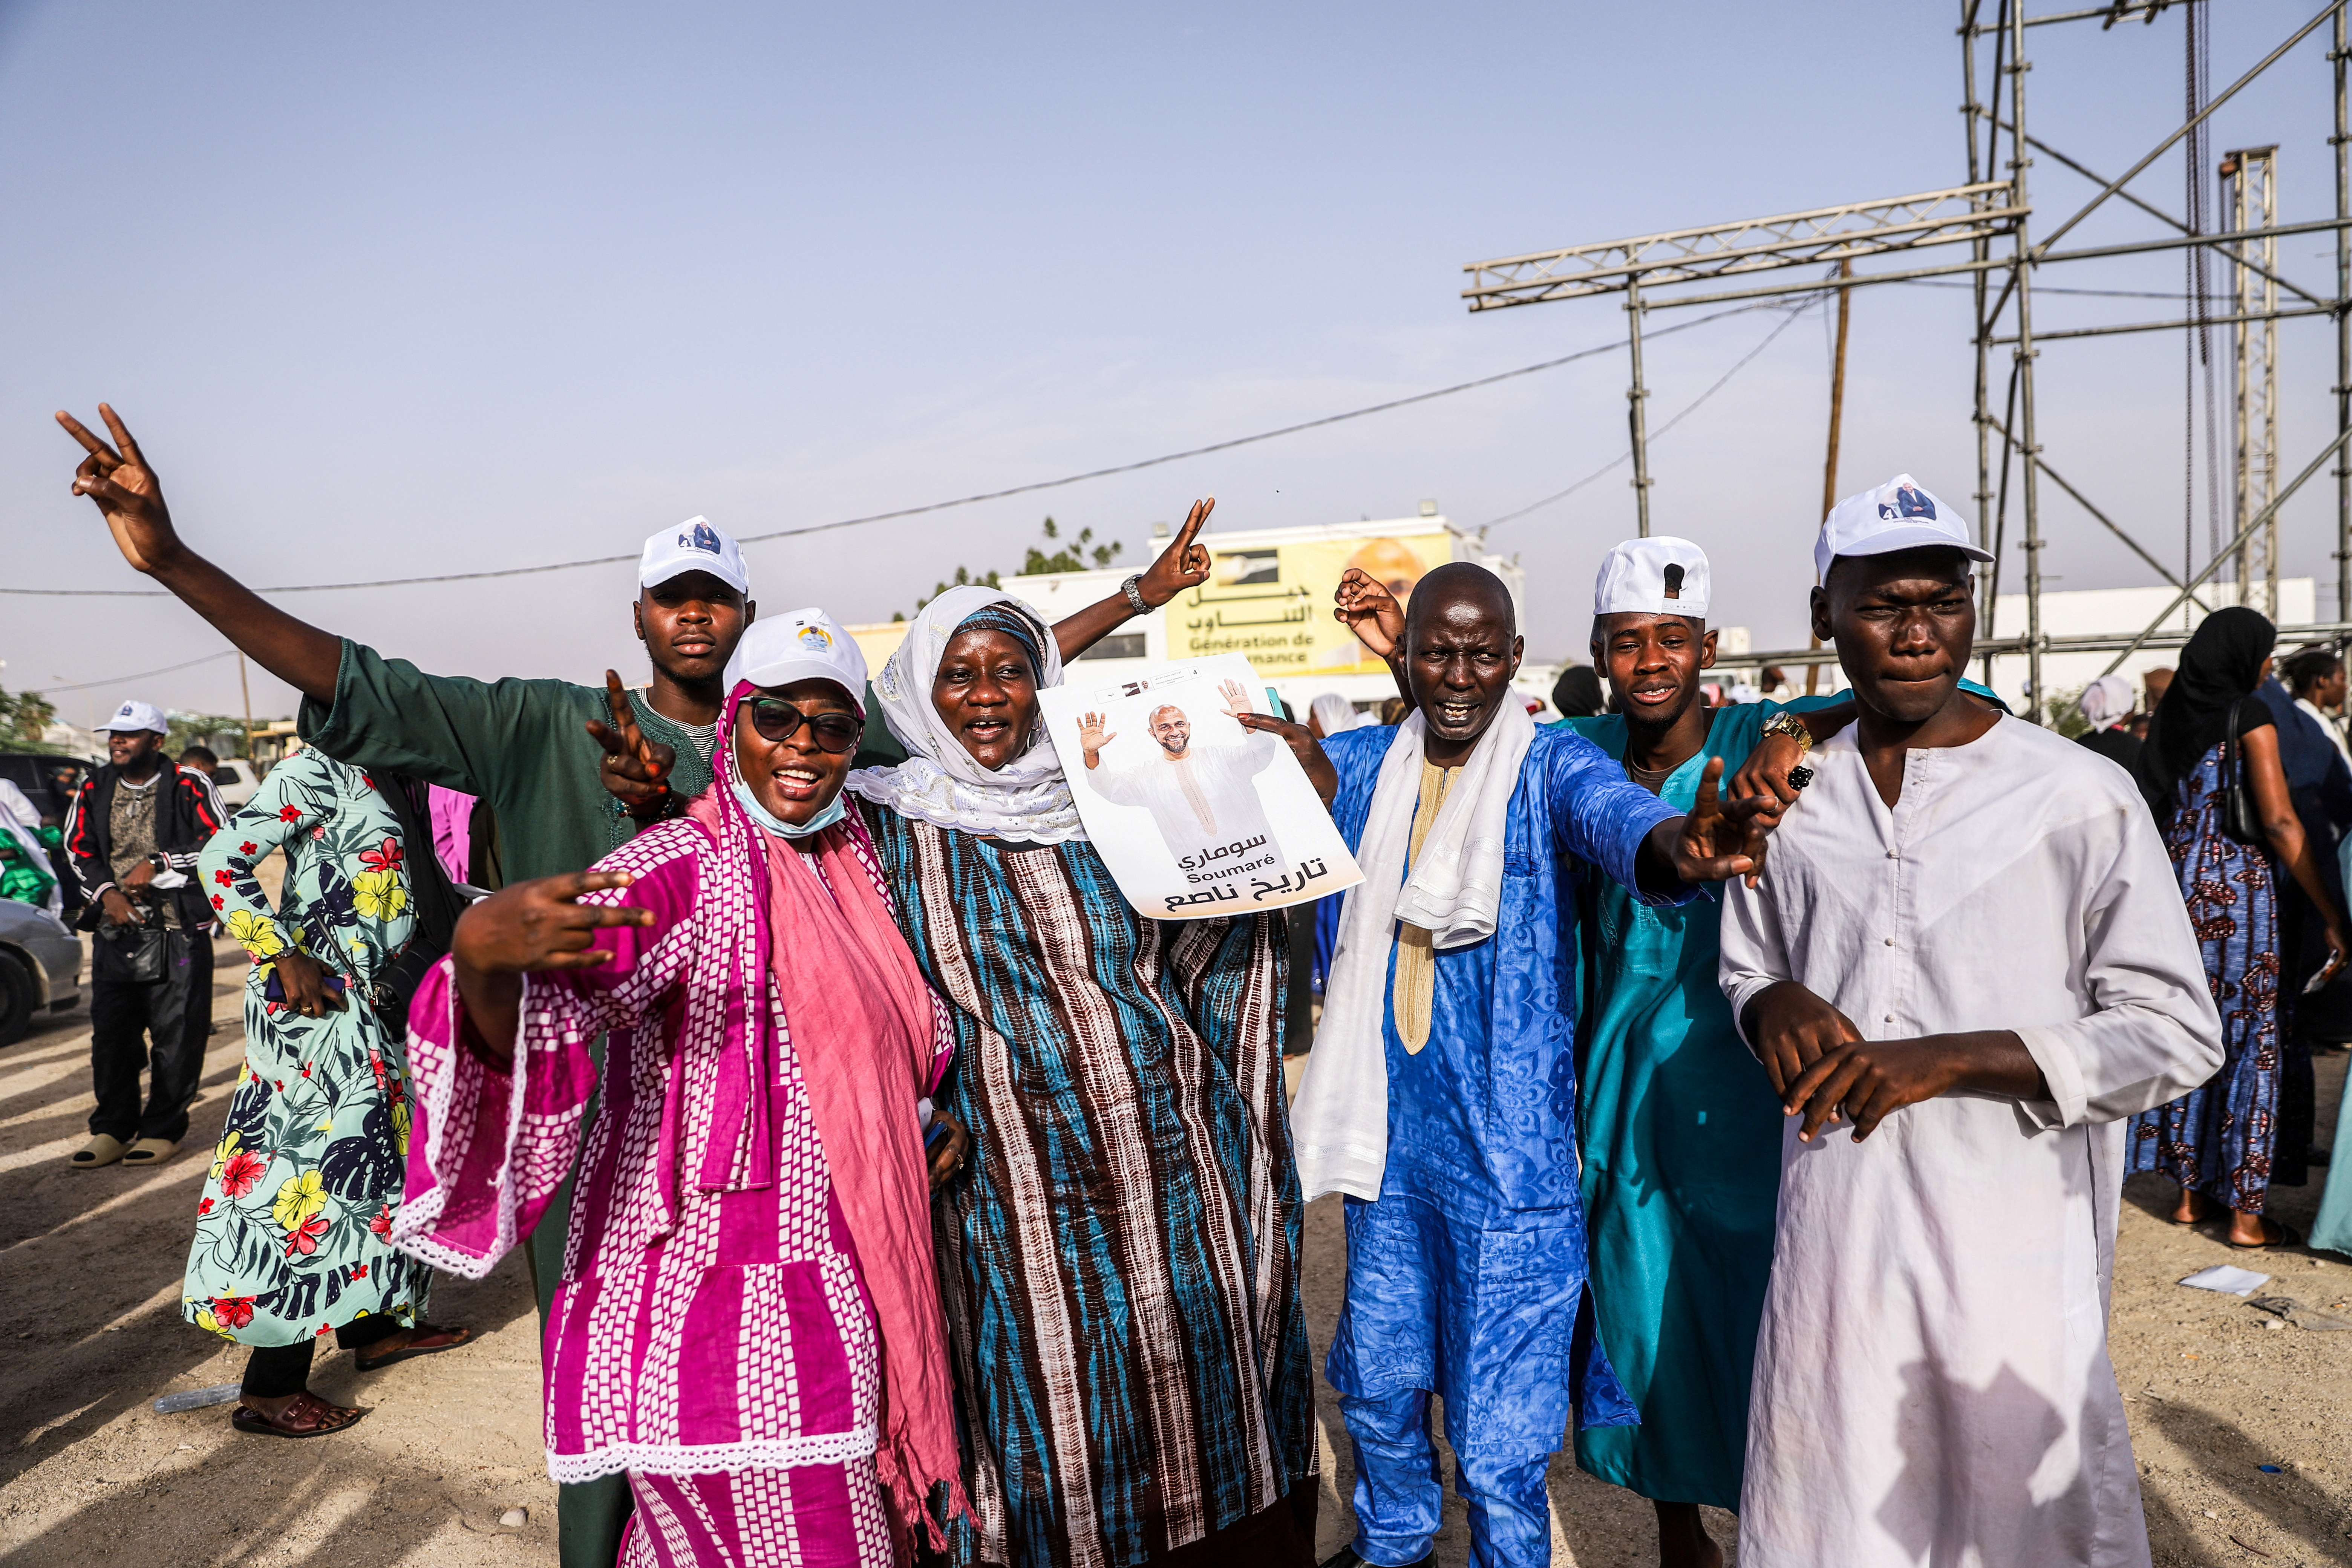 Supporters of Mauritanian presidential candidate Otouma Soumare during his final campaign rally in Nouakchott